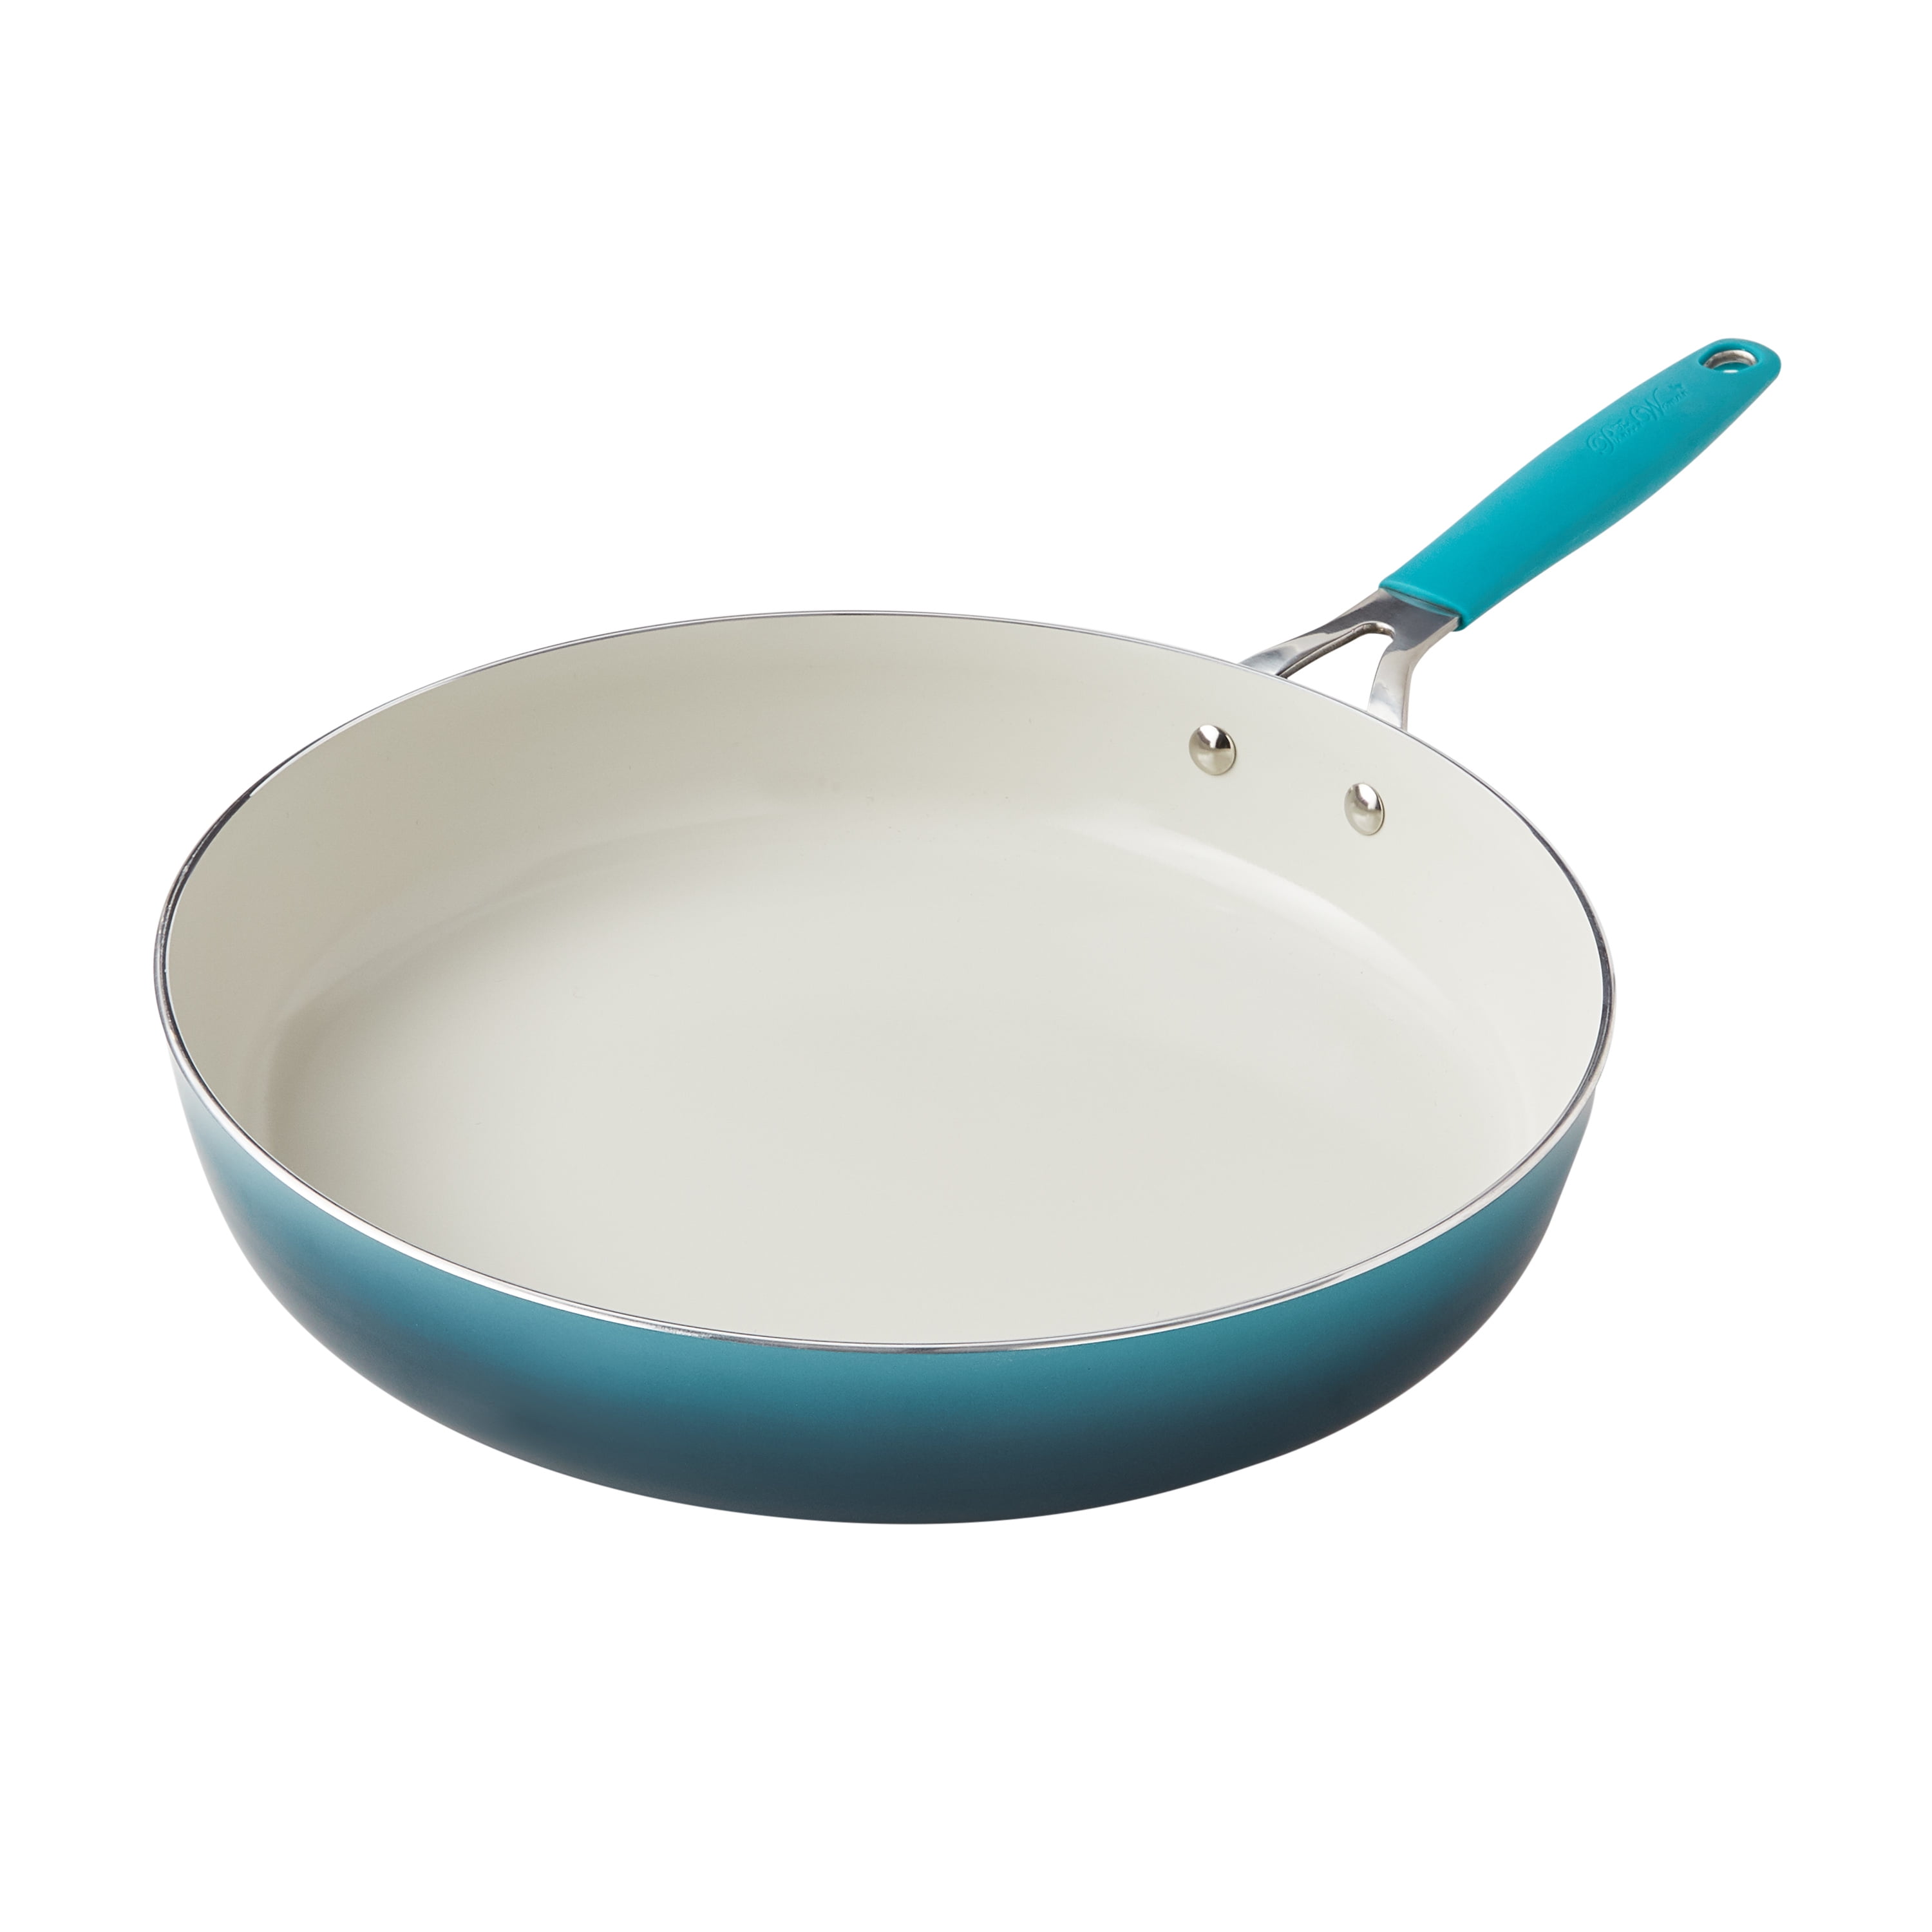 The Pioneer Woman 12-Inch Ceramic Fry Pan, Ombre Teal, Size: 12 inch